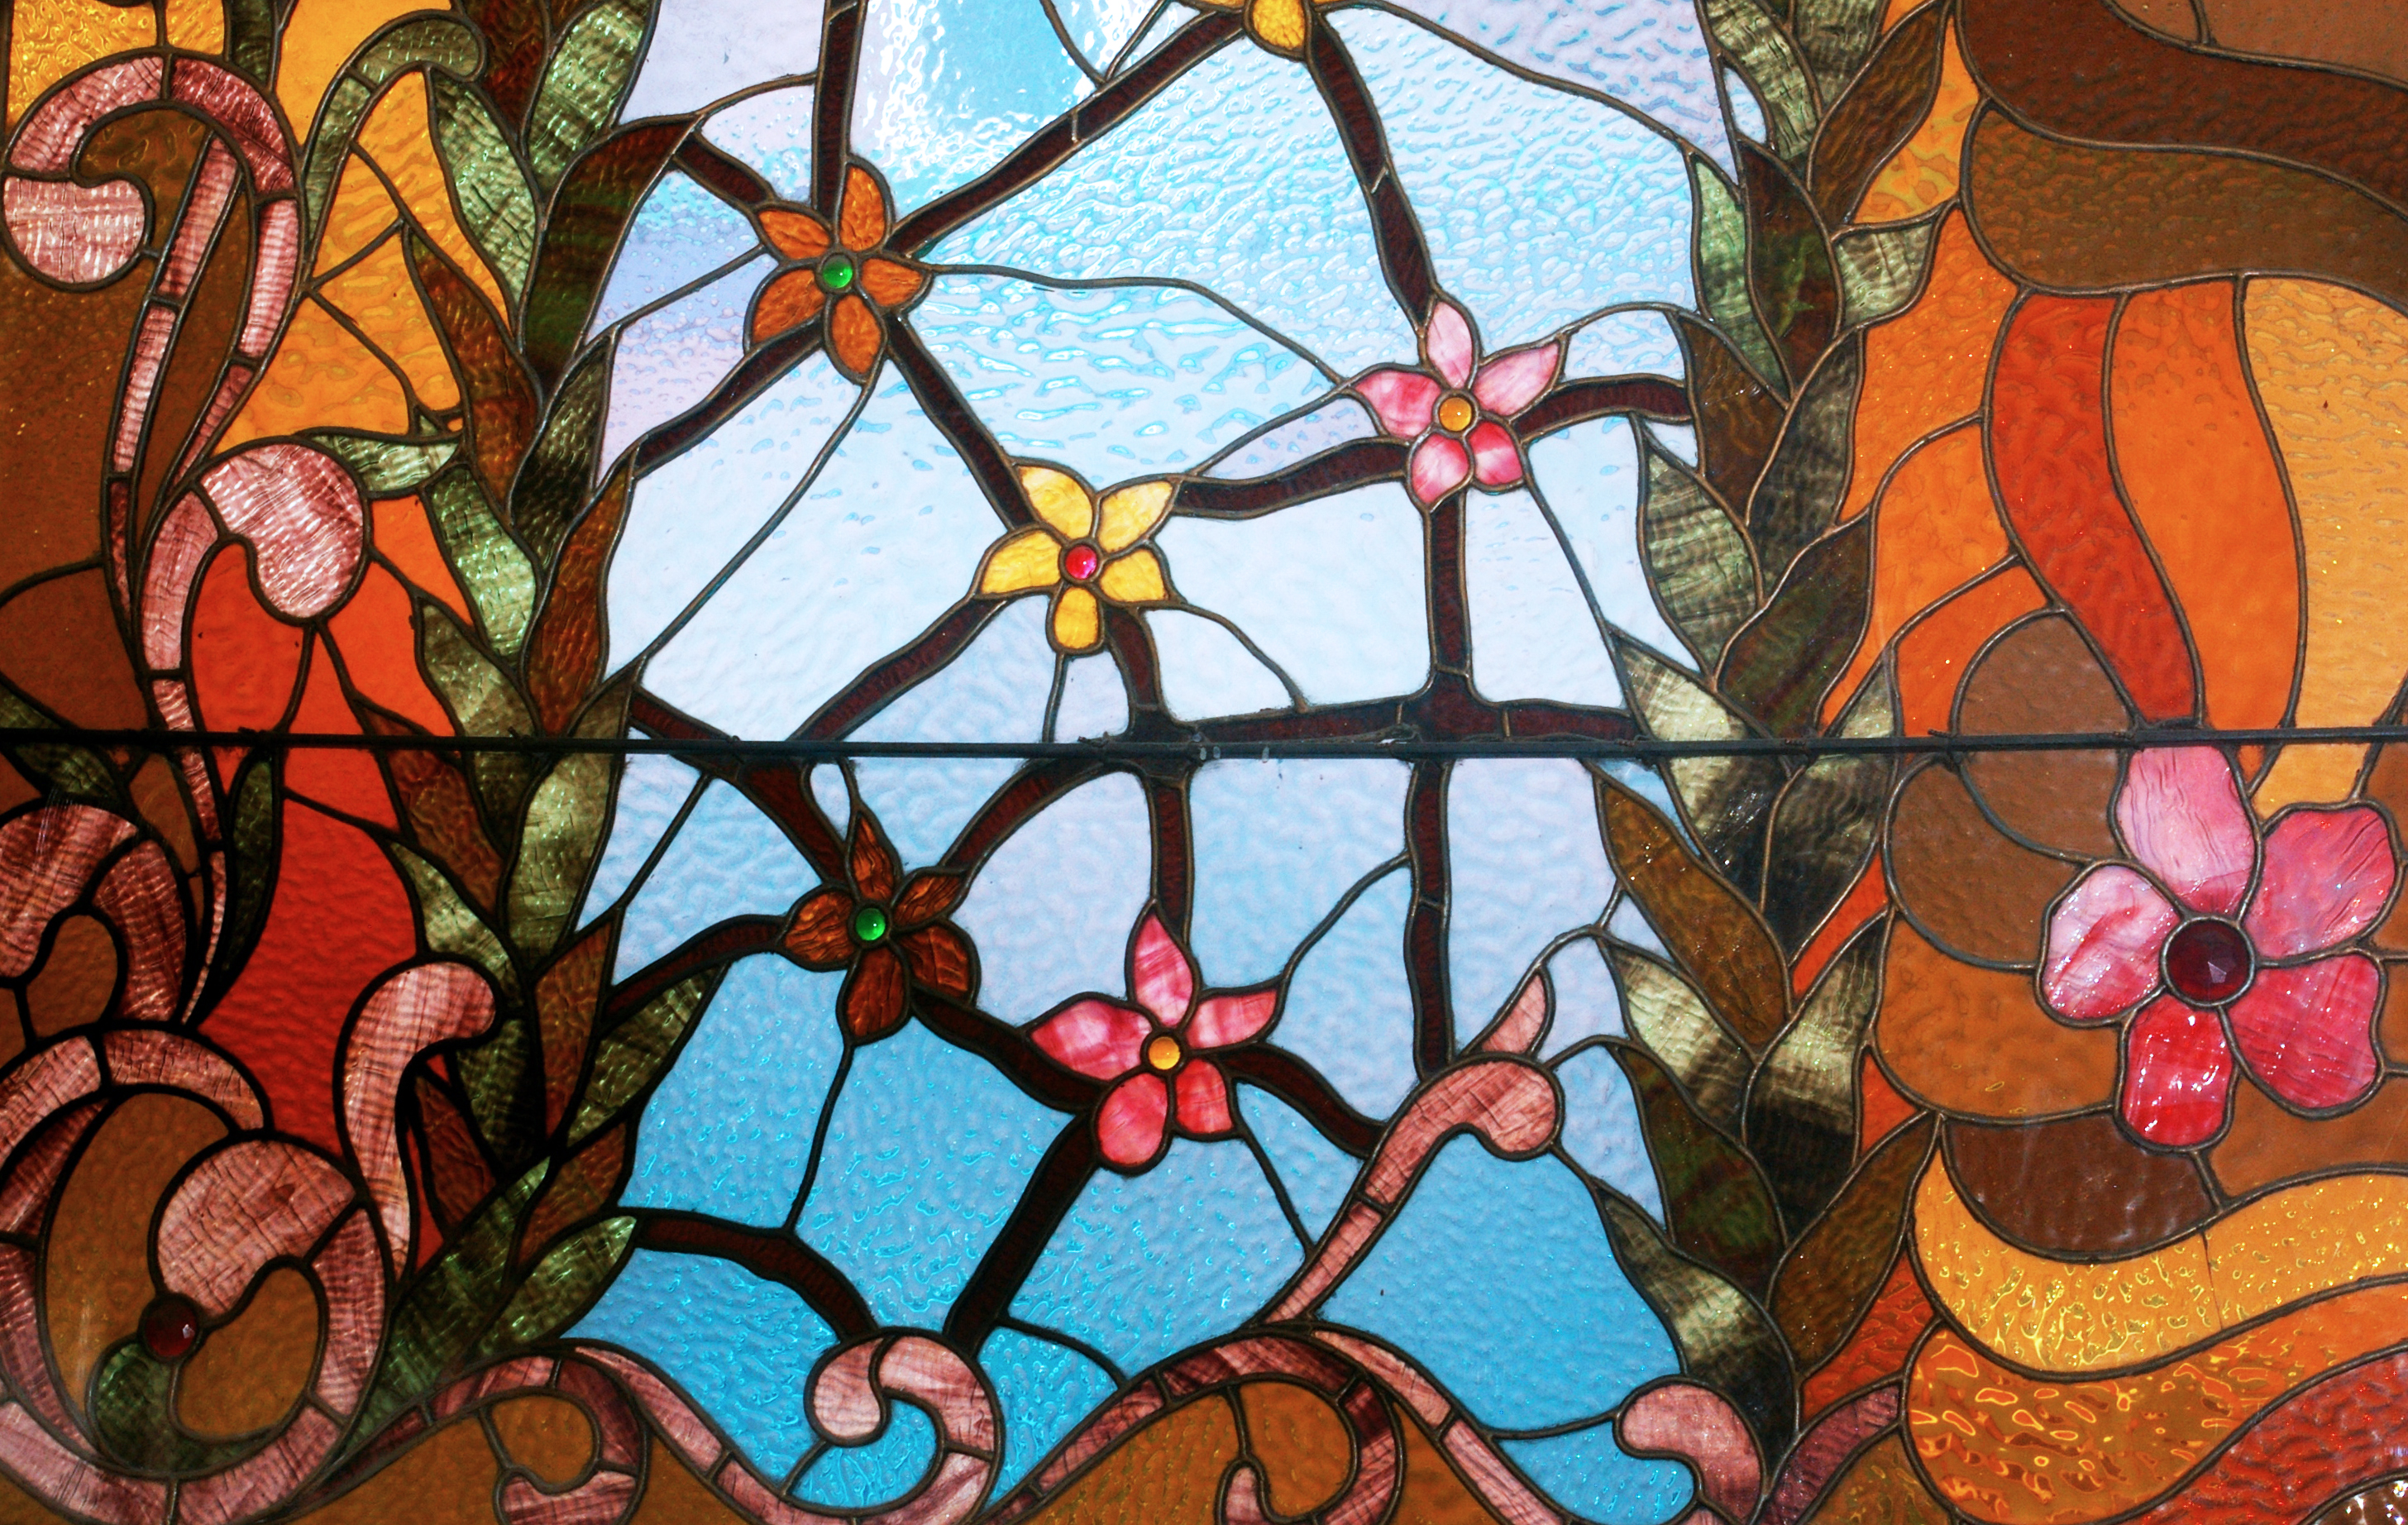 Watkins Stained Glass and the Molly Brown House Museum - Molly Brown House  Museum